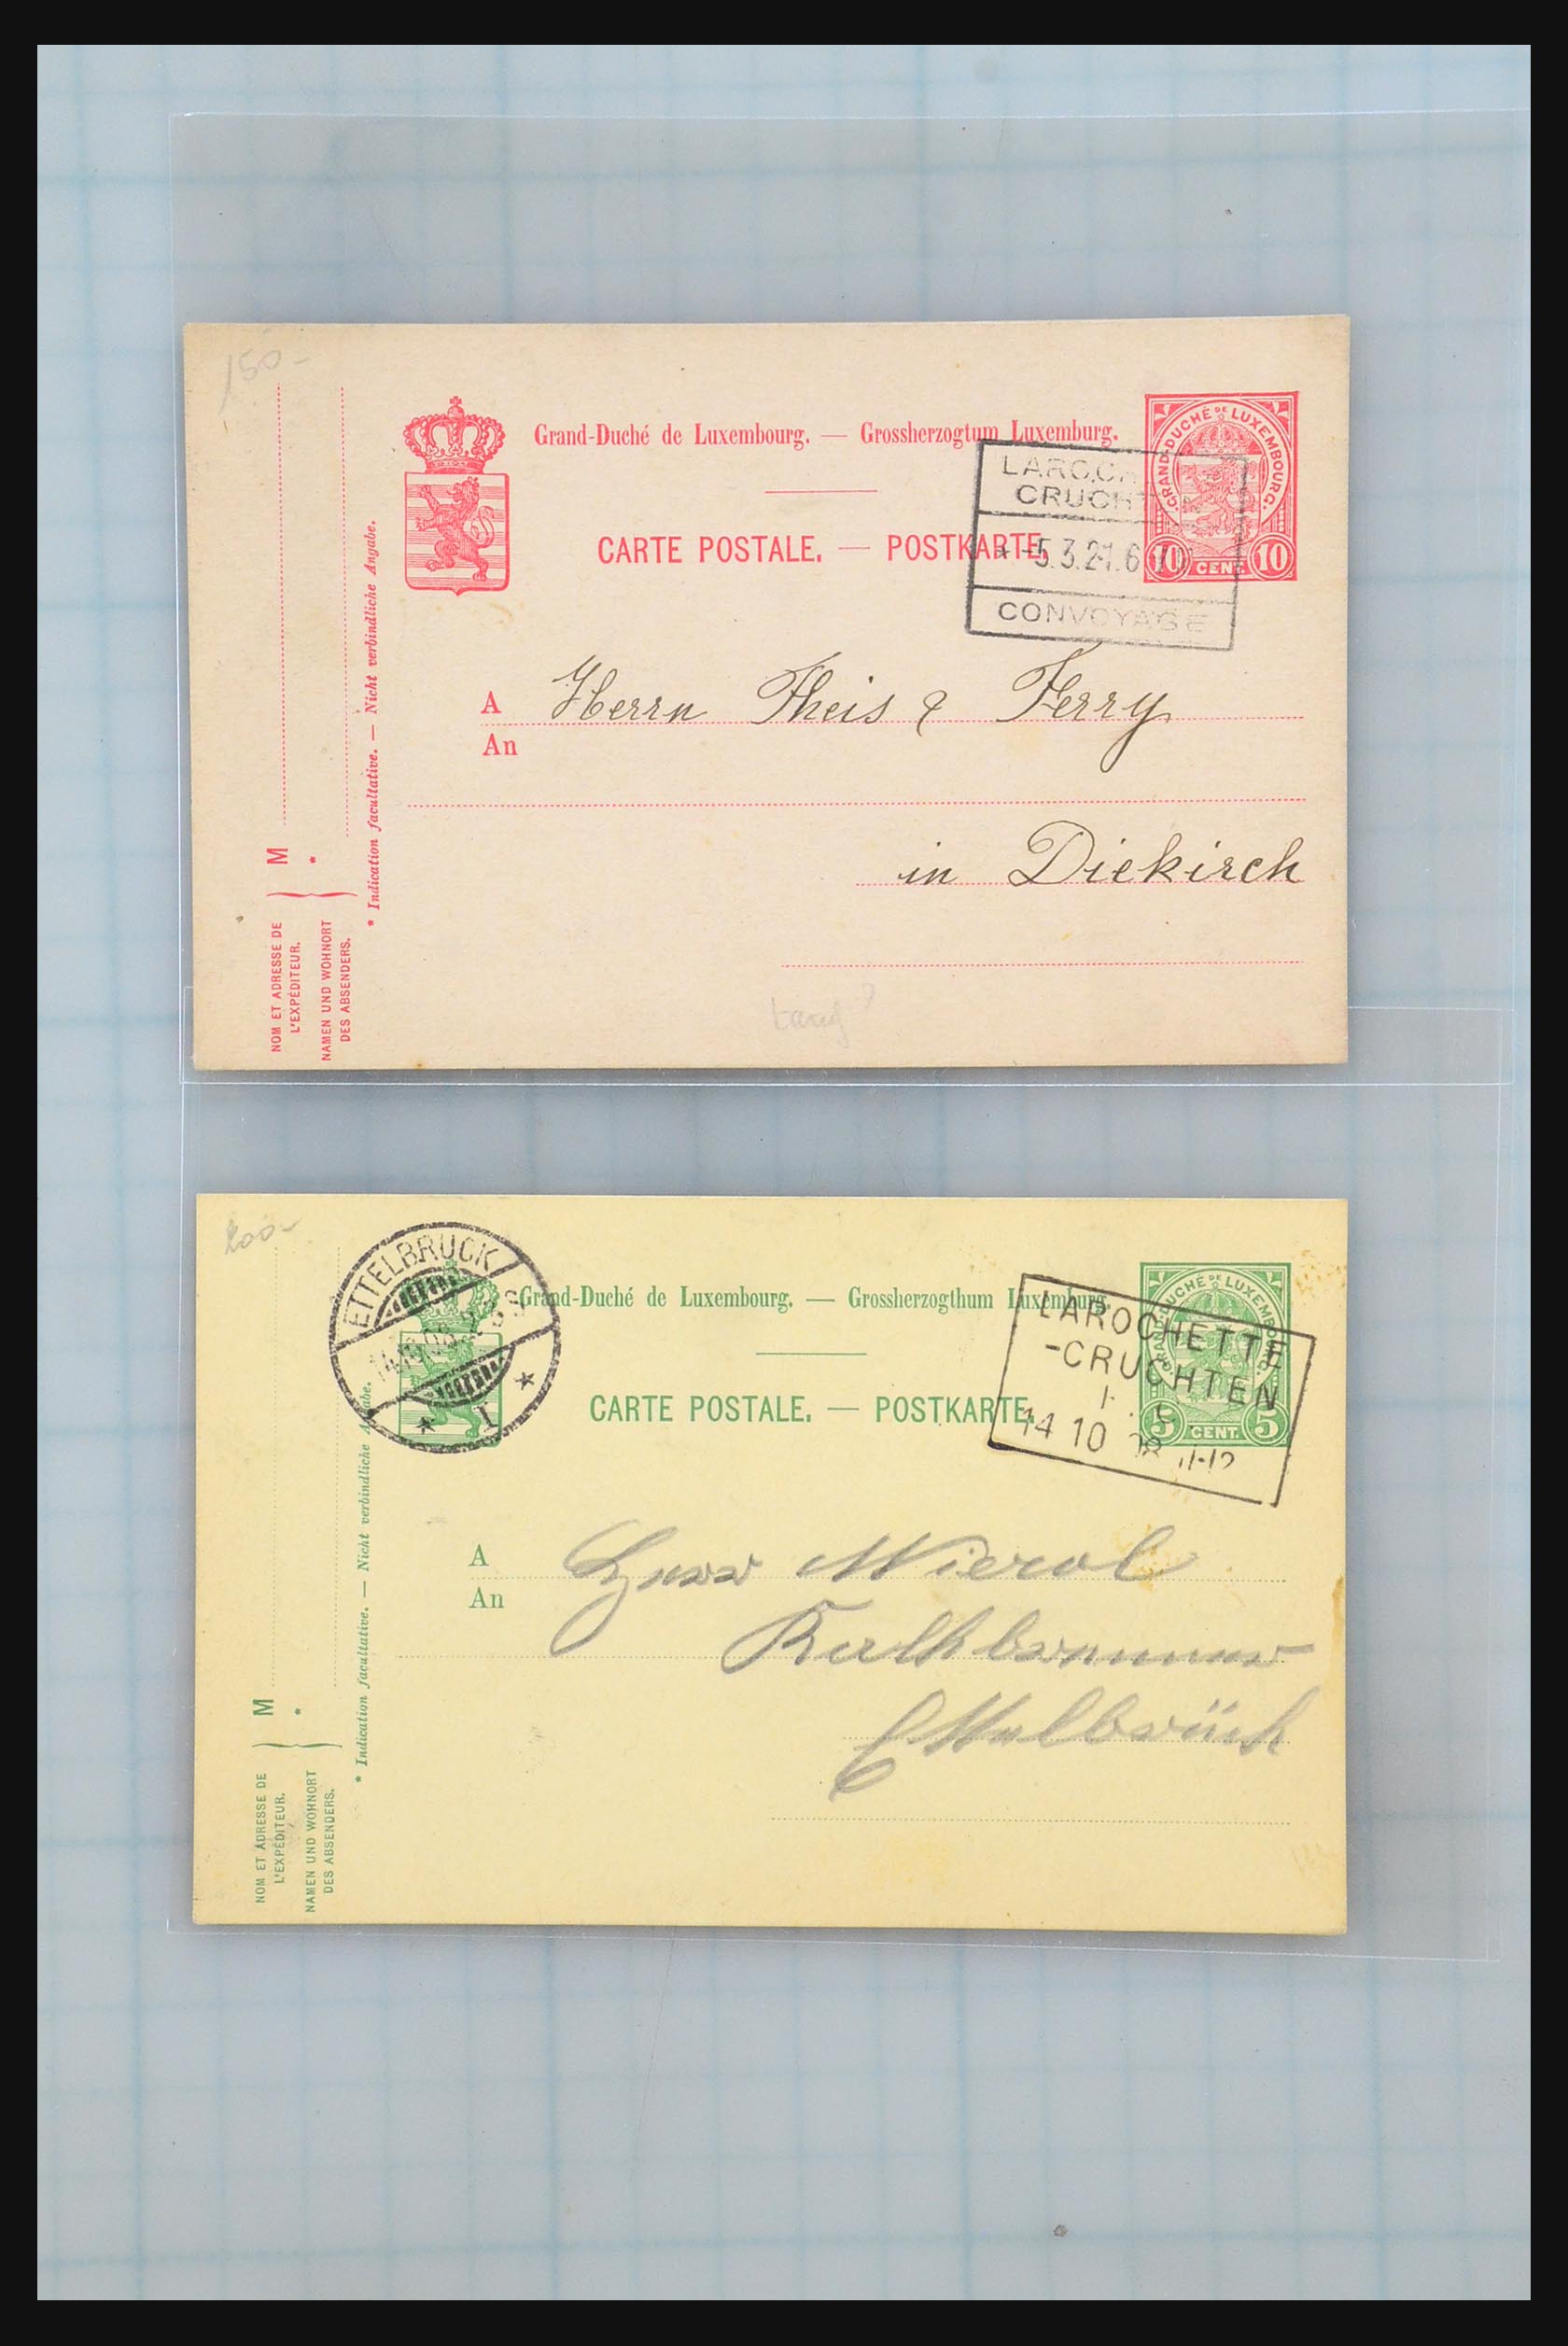 31358 052 - 31358 Portugal/Luxemburg/Greece covers 1880-1960.